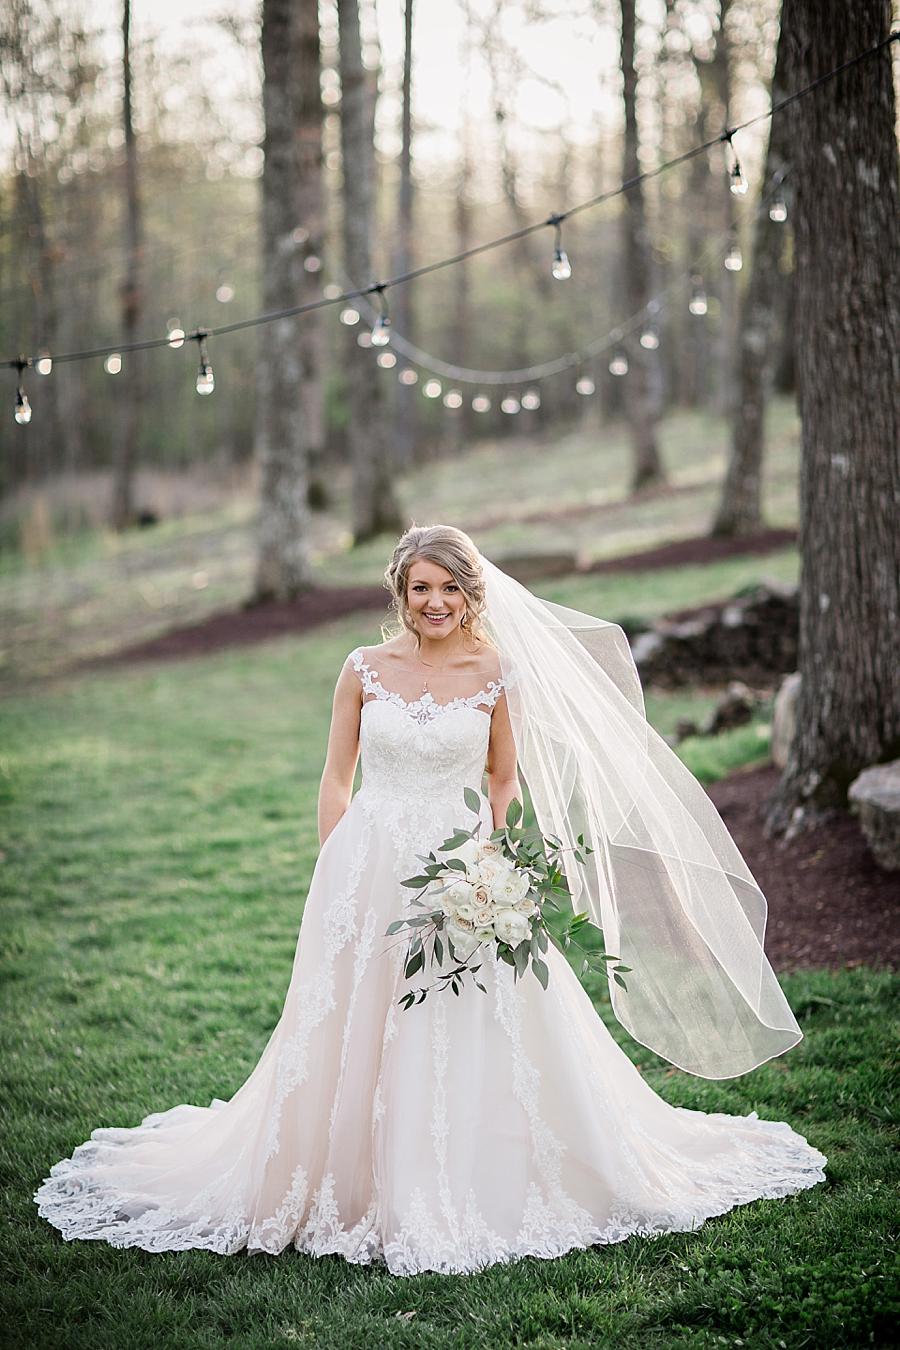 Veil blowing at this Castleton Farms Bridal session by Knoxville Wedding Photographer, Amanda May Photos.